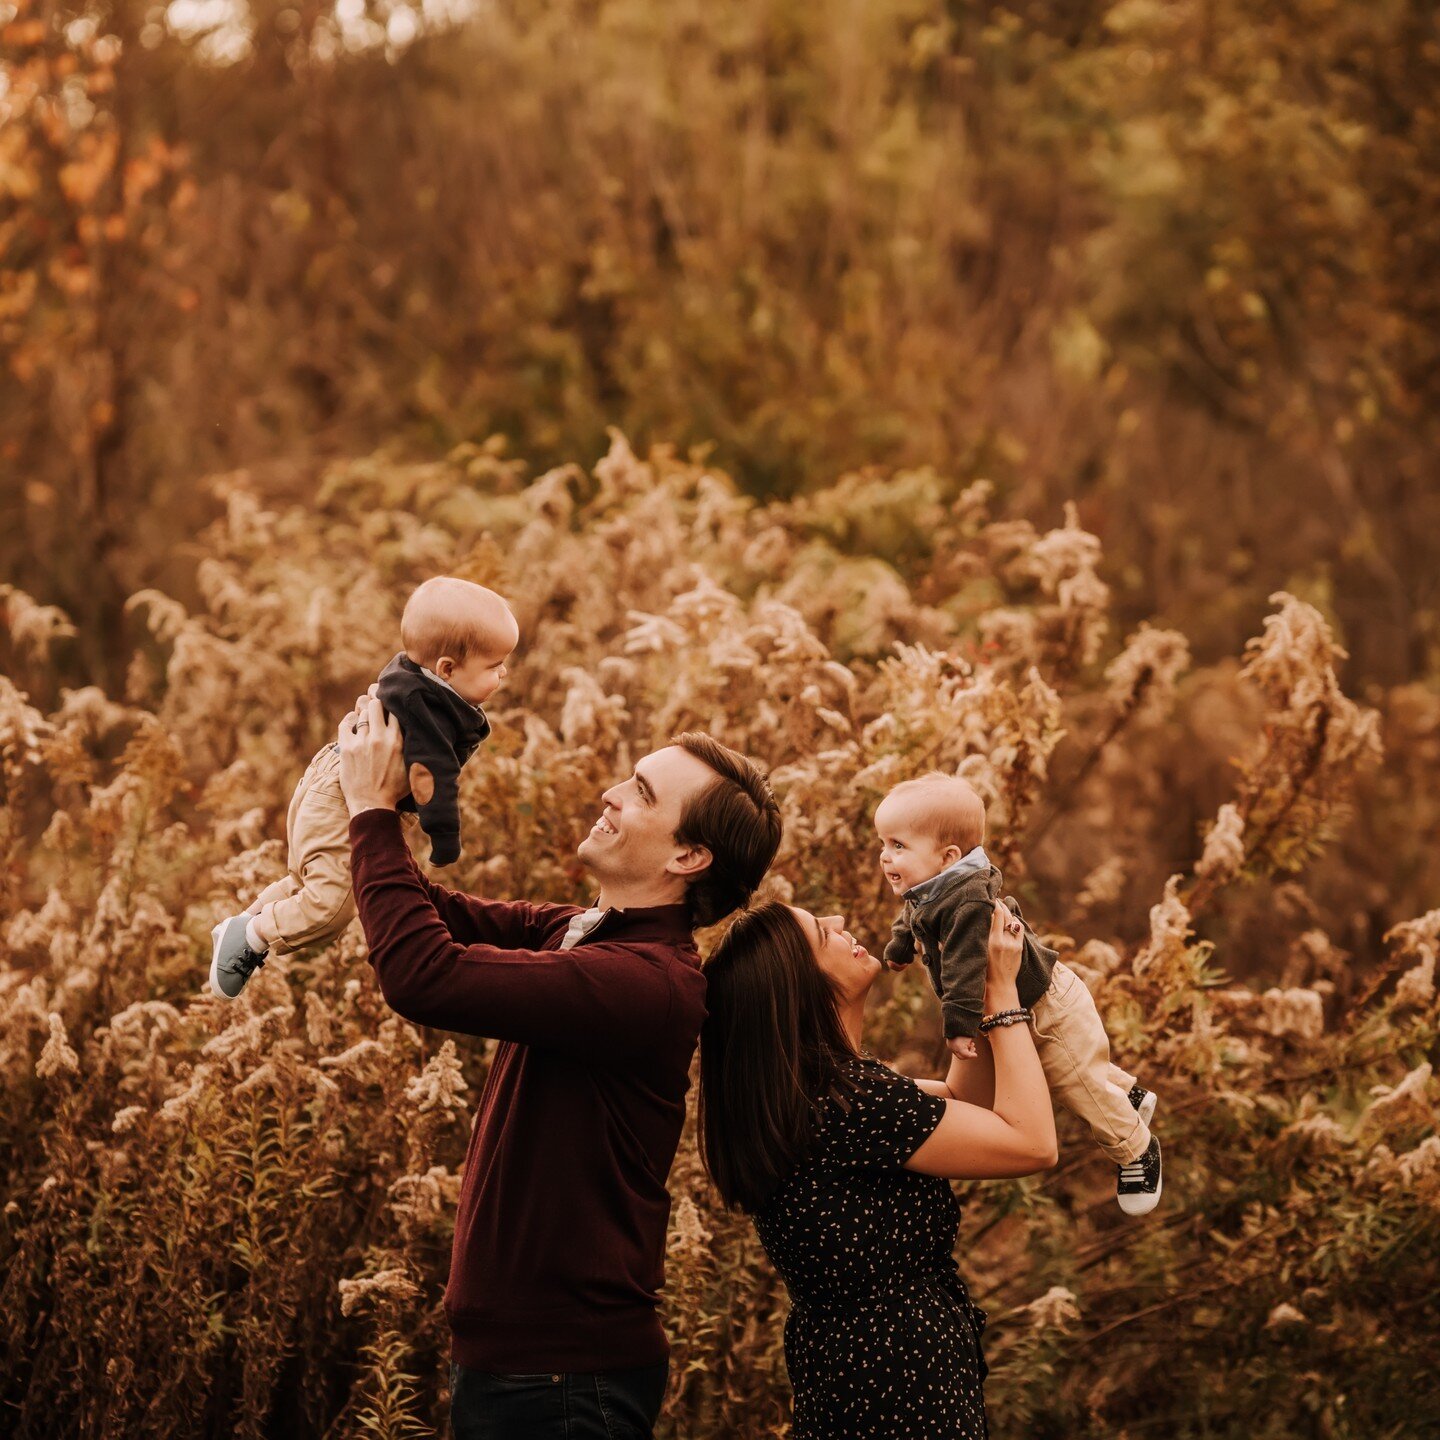 Can't wait for these beautiful fall colors to start appearing !! 🍂 And this beautiful family, hello happiness 💕 
.
.
.
#charlottefamilyphotographer #cltphotographer #charlottelifestylephotographer #lakenormanfamilyphotographer #huntersvillefamilyph